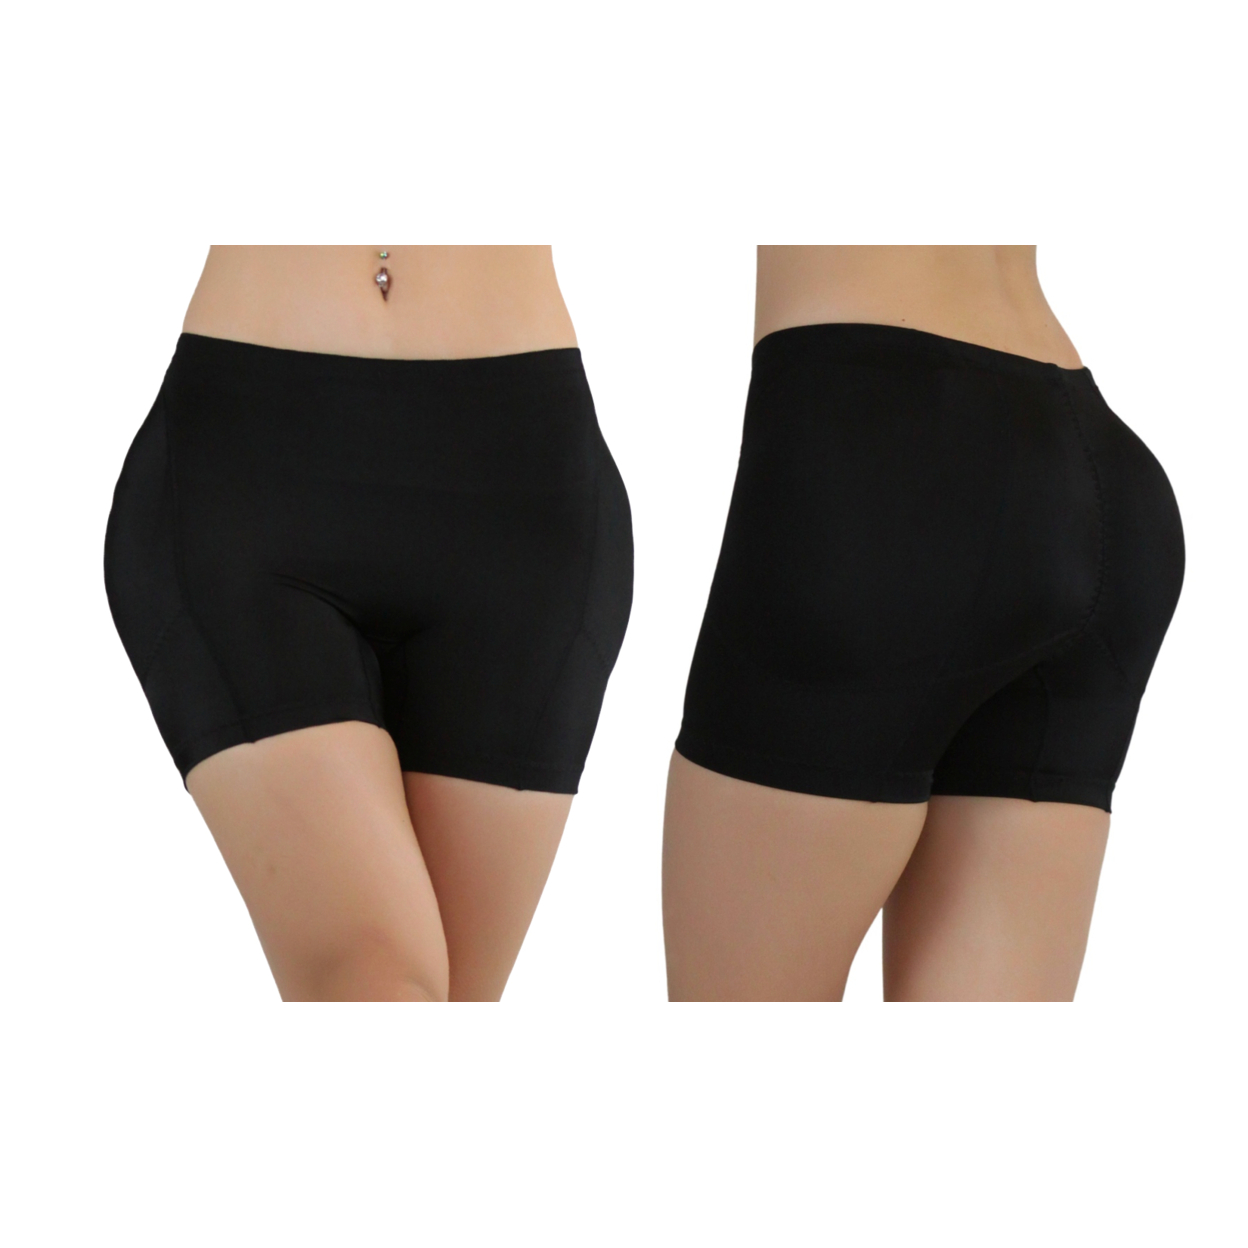 1 Or 2 Pack Of Women Butt And Hip Padded Shaper - Black, Large